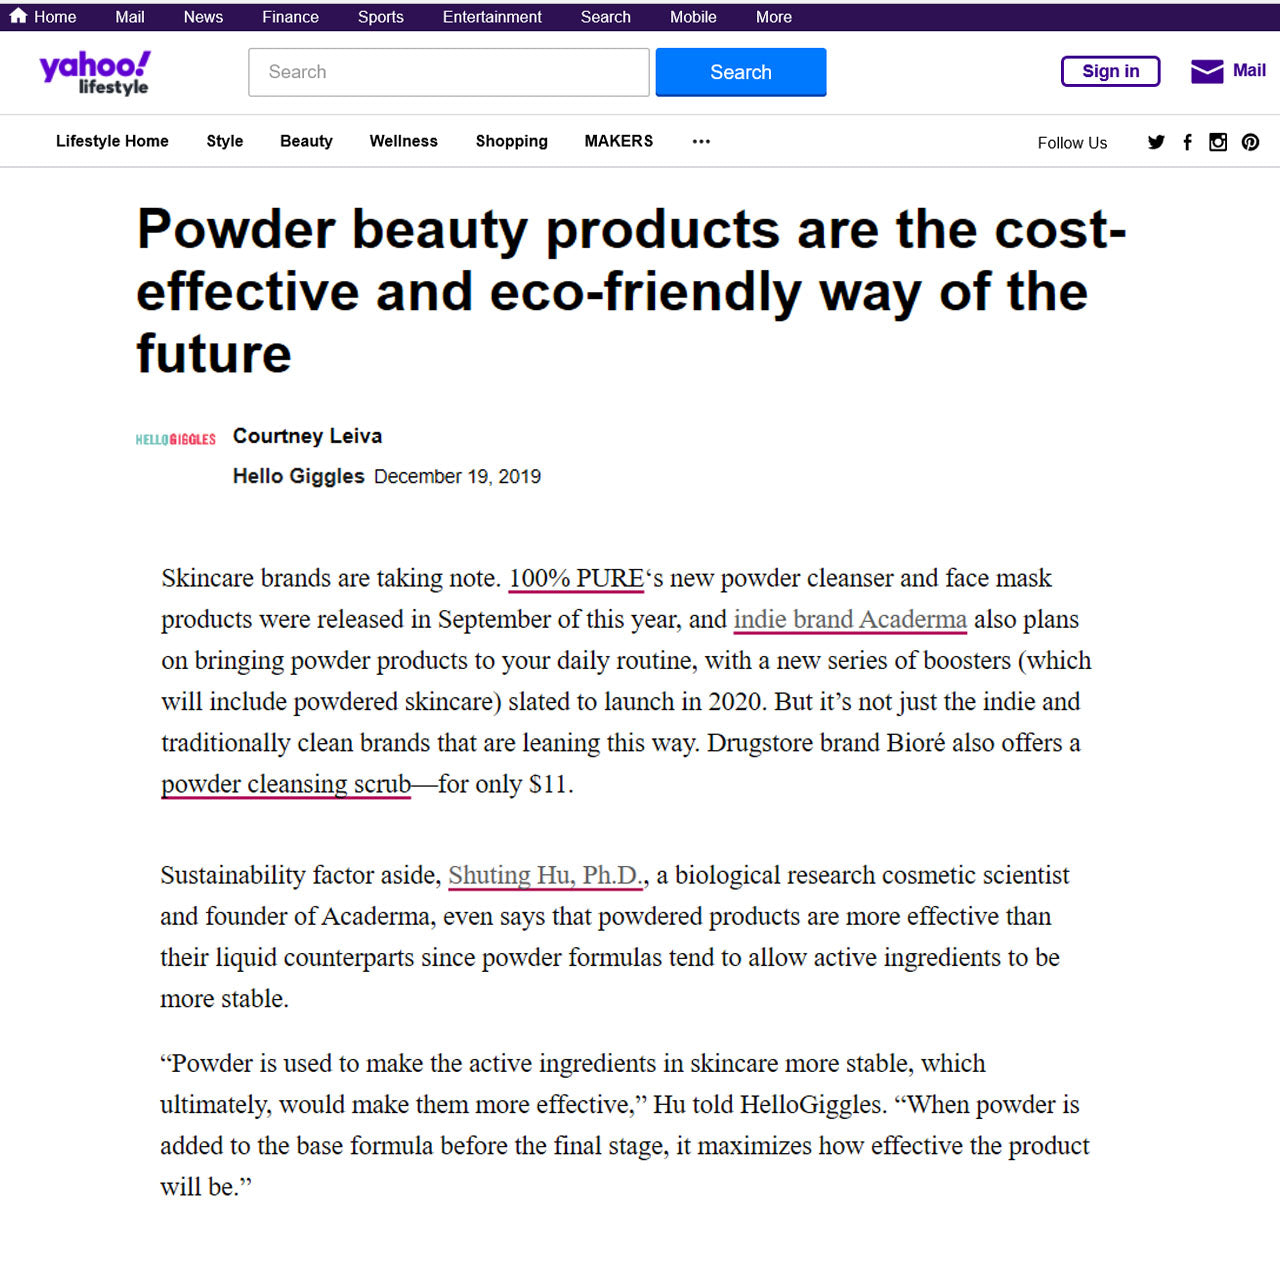 Yahoo Lifestyle Interview About Powder Beauty Products Acaderma Smart Clean And Powerful Skincare